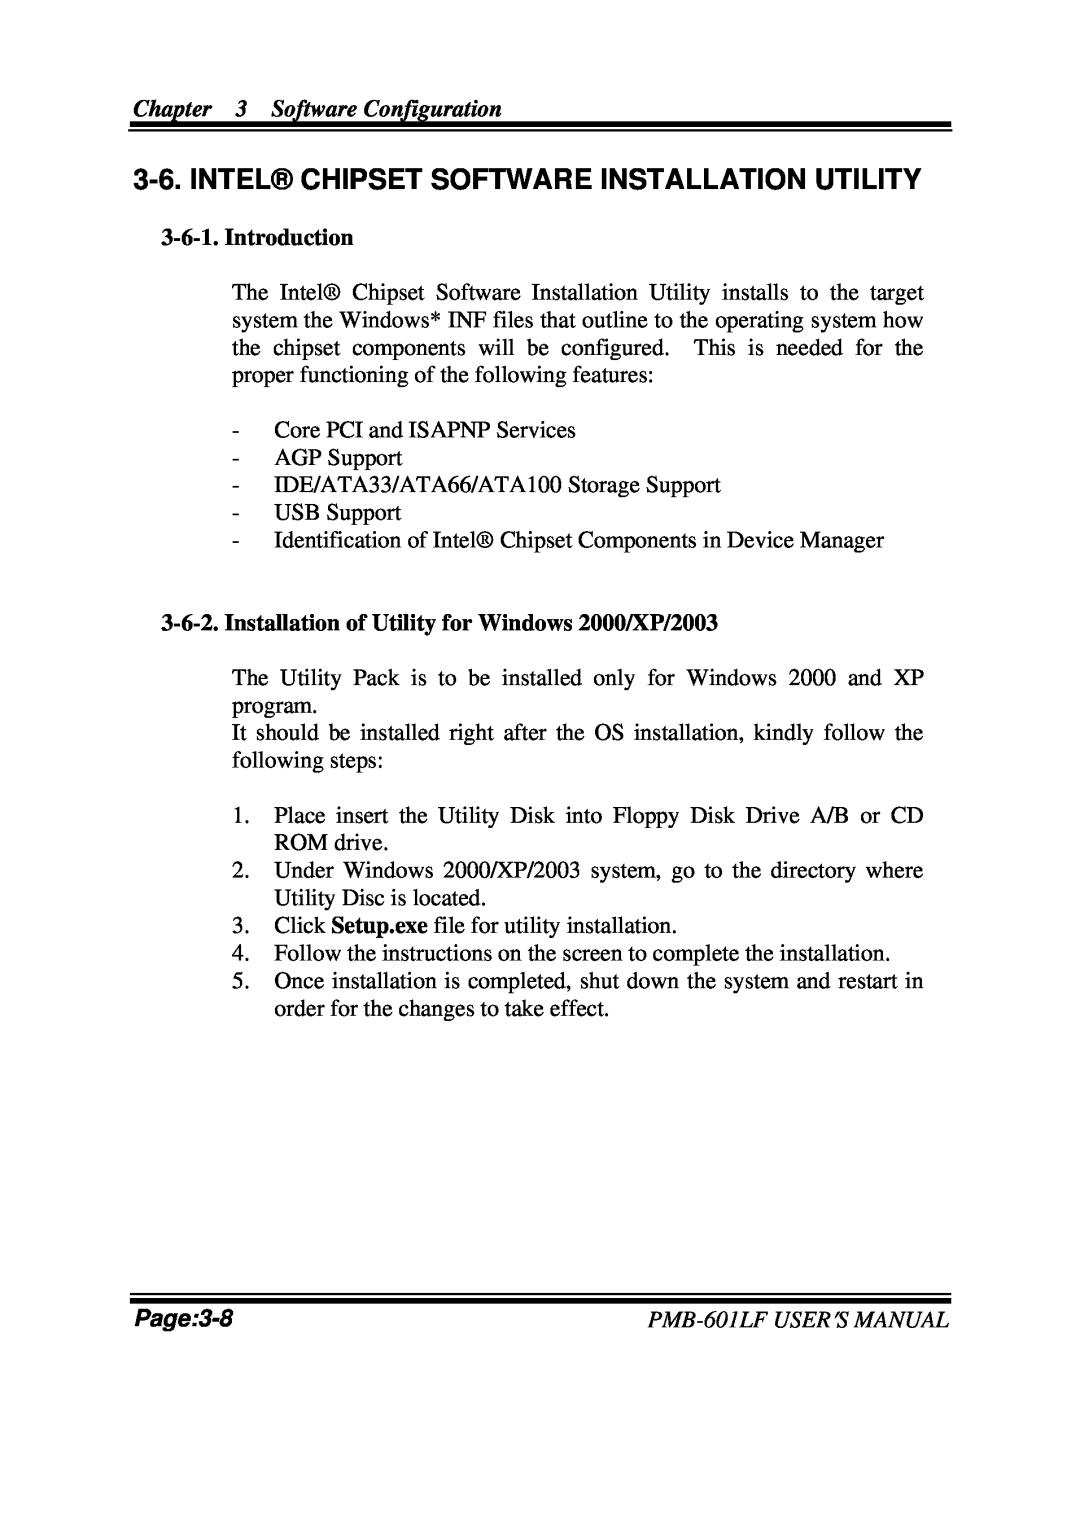 Intel PMB-601LF user manual Intel Chipset Software Installation Utility, Introduction, Page:3-8, Software Configuration 